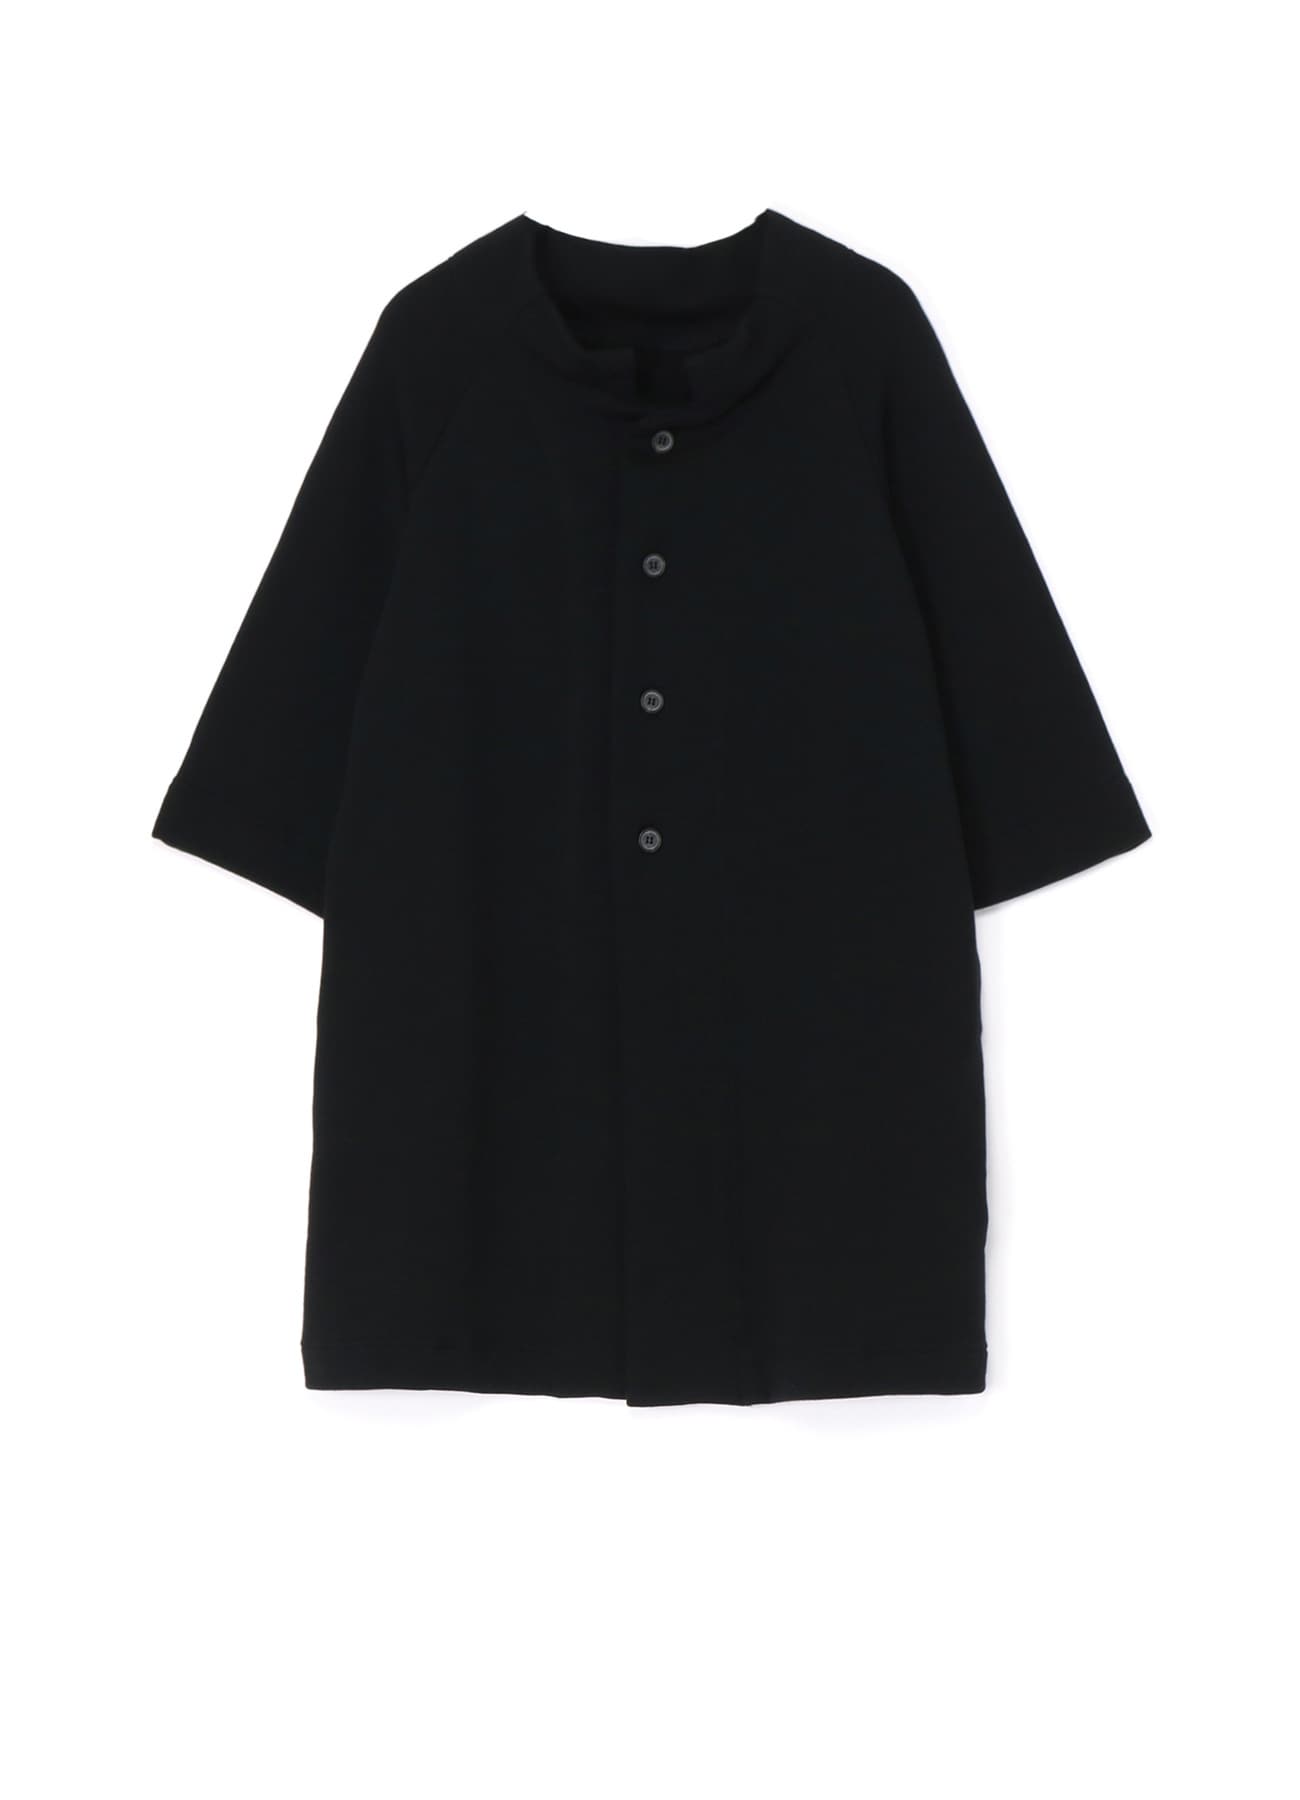 COTTON/LYOCELL FRENCH TERRY RAGLAN OVERSIZED COAT(S Black): Y's 